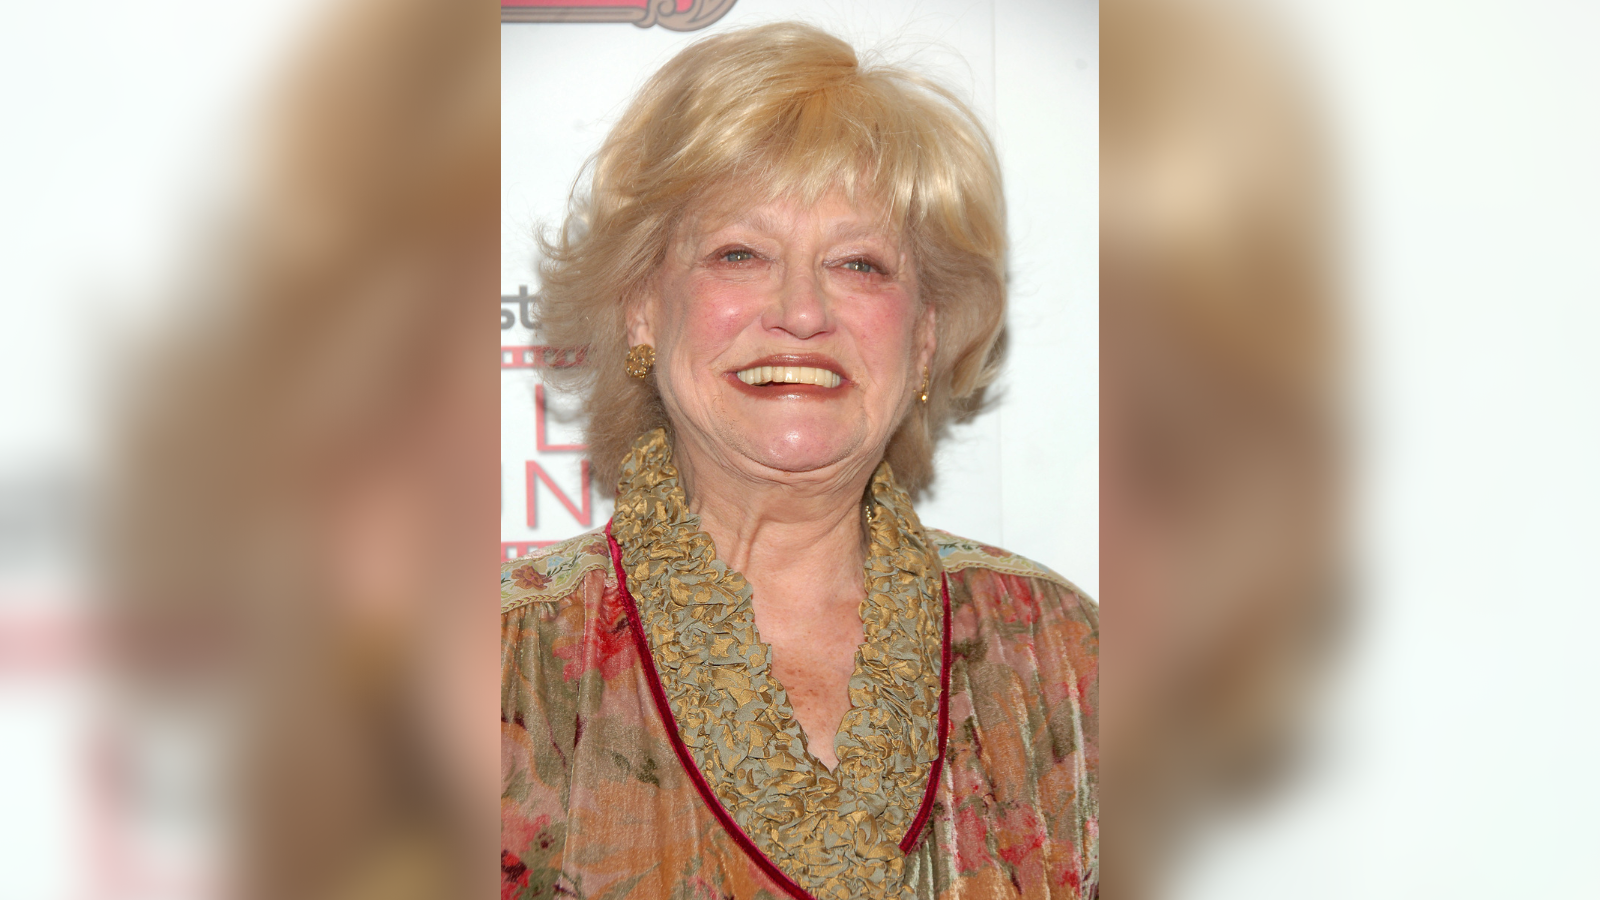 ‘Goodfellas’ and ‘The Sopranos’ actress Suzanne Shepherd dies at 89